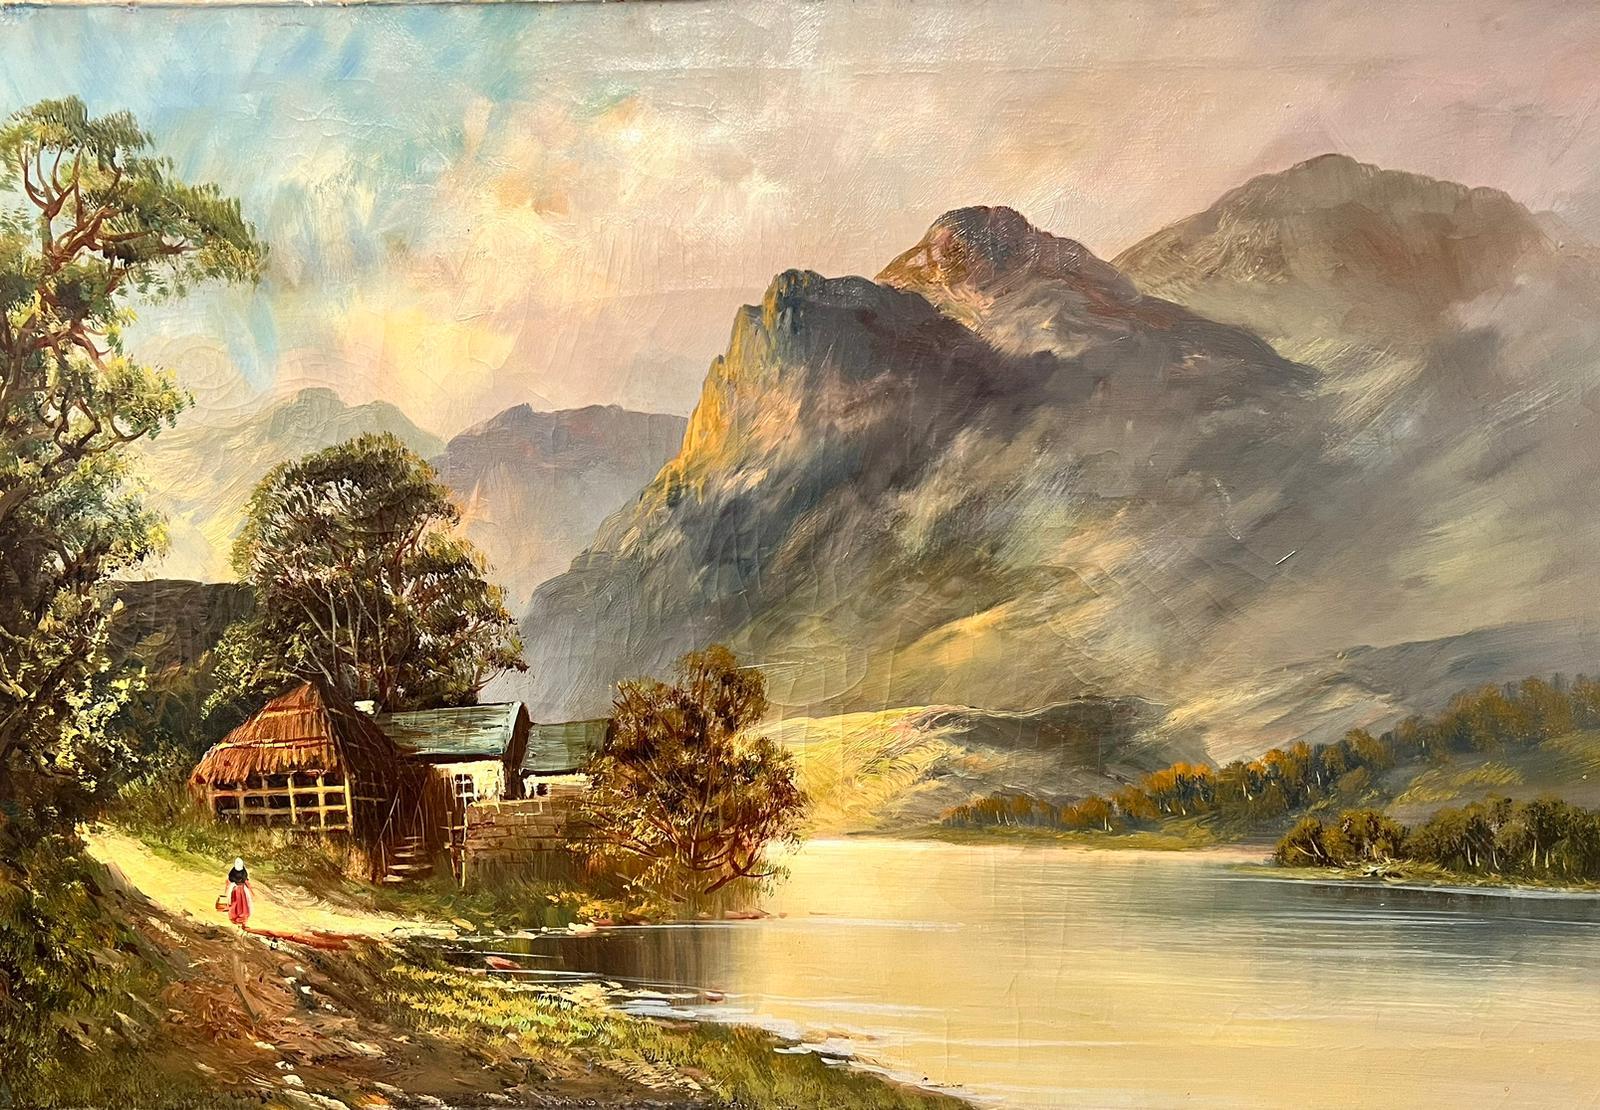 Francis E. Jamieson Landscape Painting - Antique Scottish Oil Painting Highland Loch Lady by Cottage Mountains